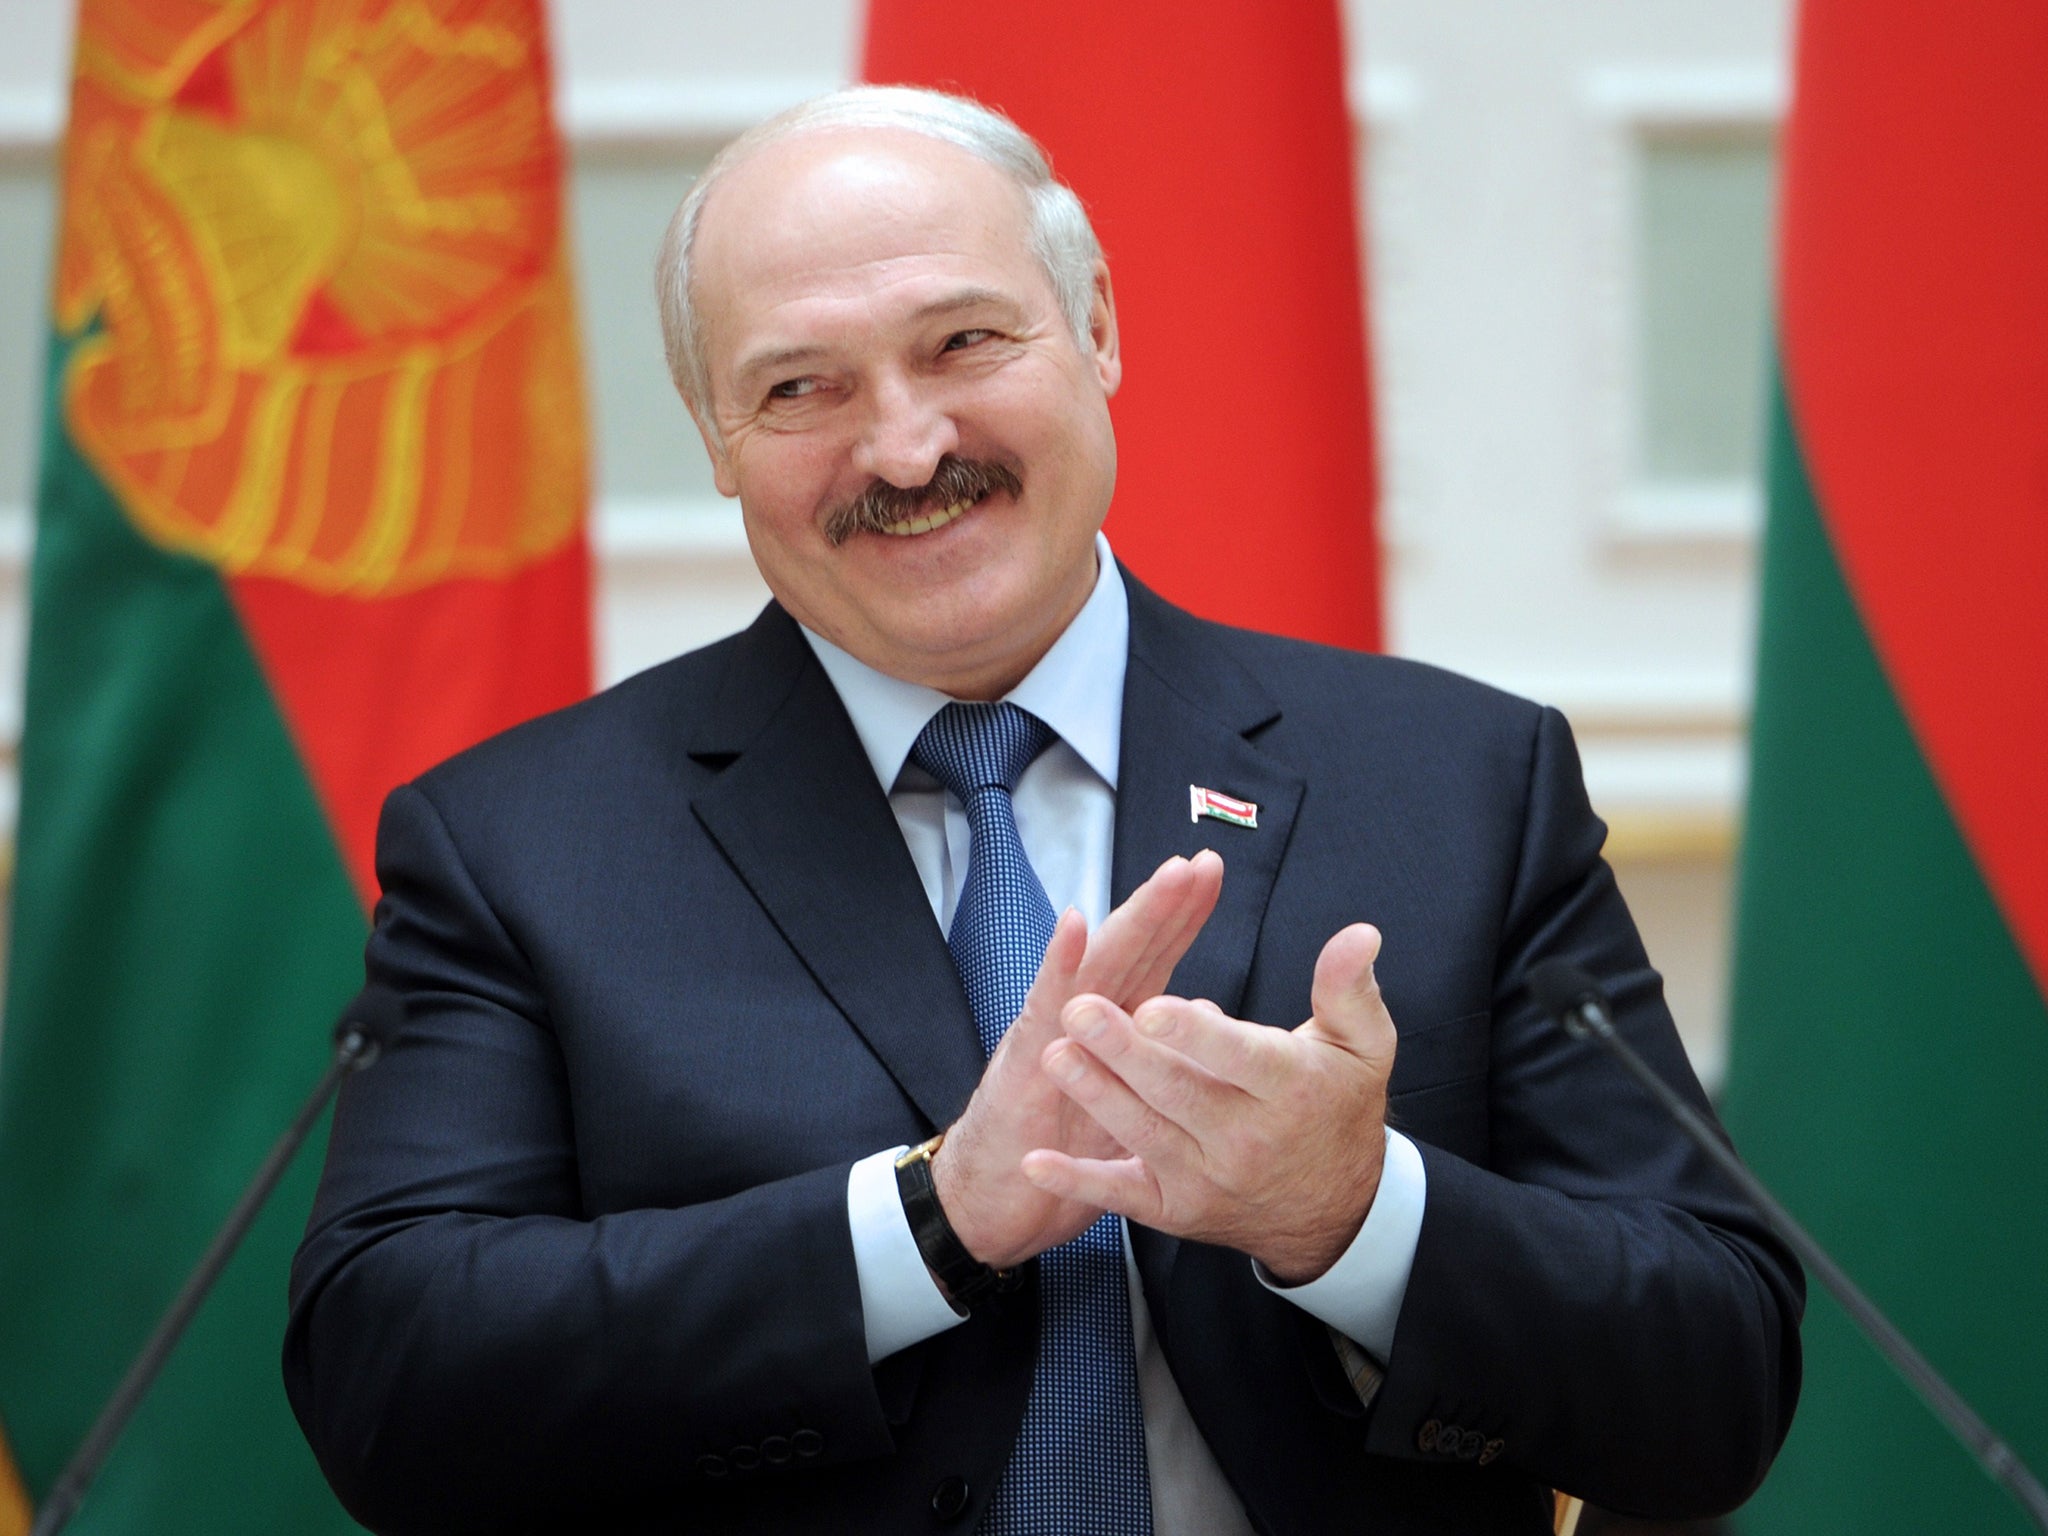 Belarusian president Alexander Lukashenko told people to 'get undressed and work until you sweat', sparking hilarity online